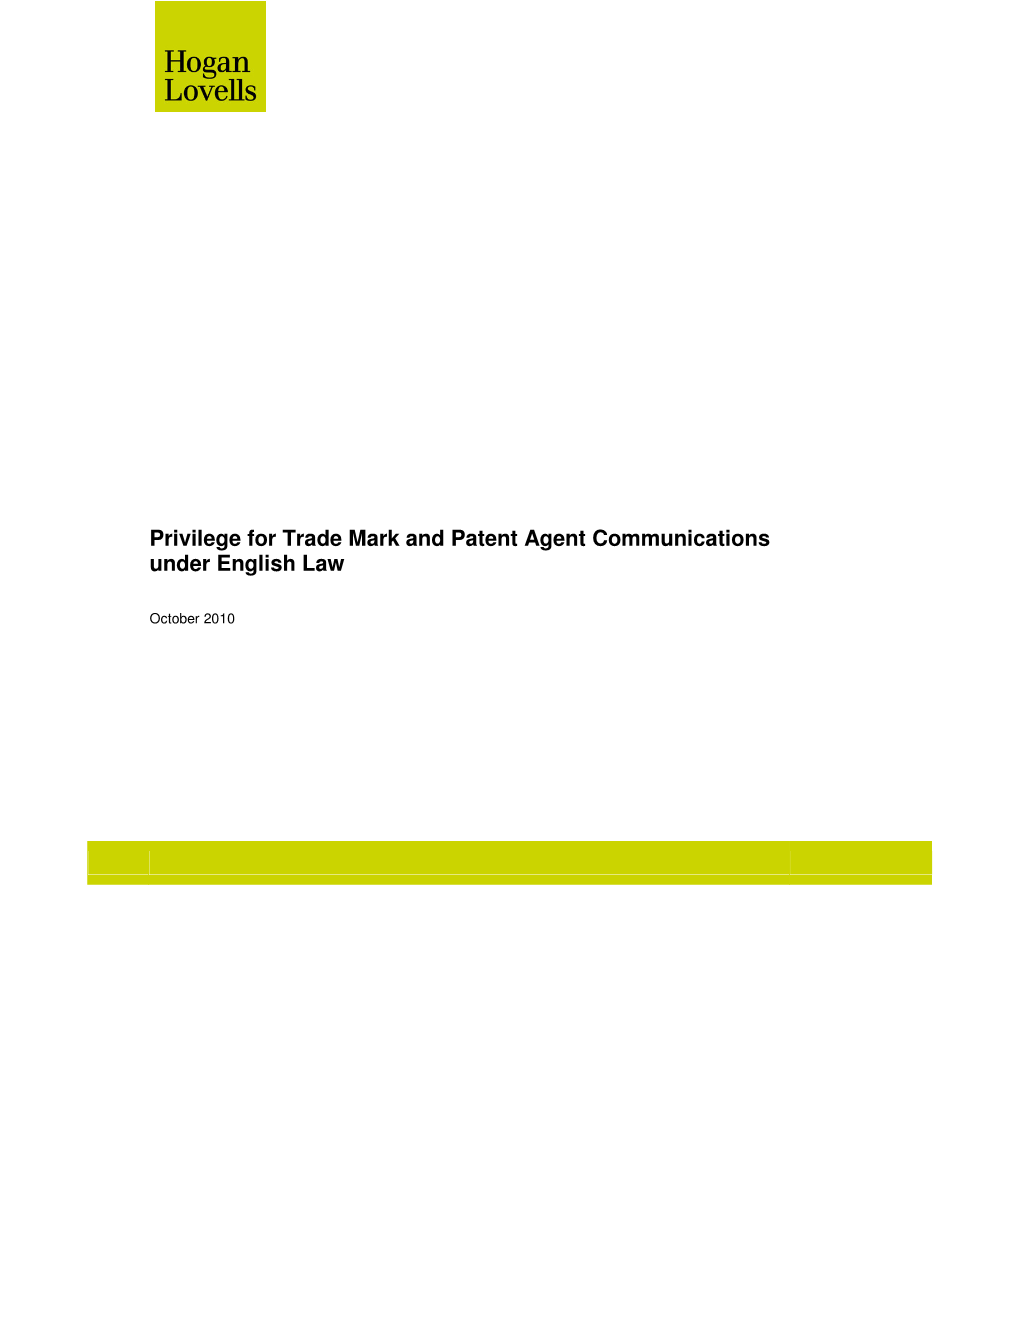 Privilege for Trade Mark and Patent Agent Communications Under English Law